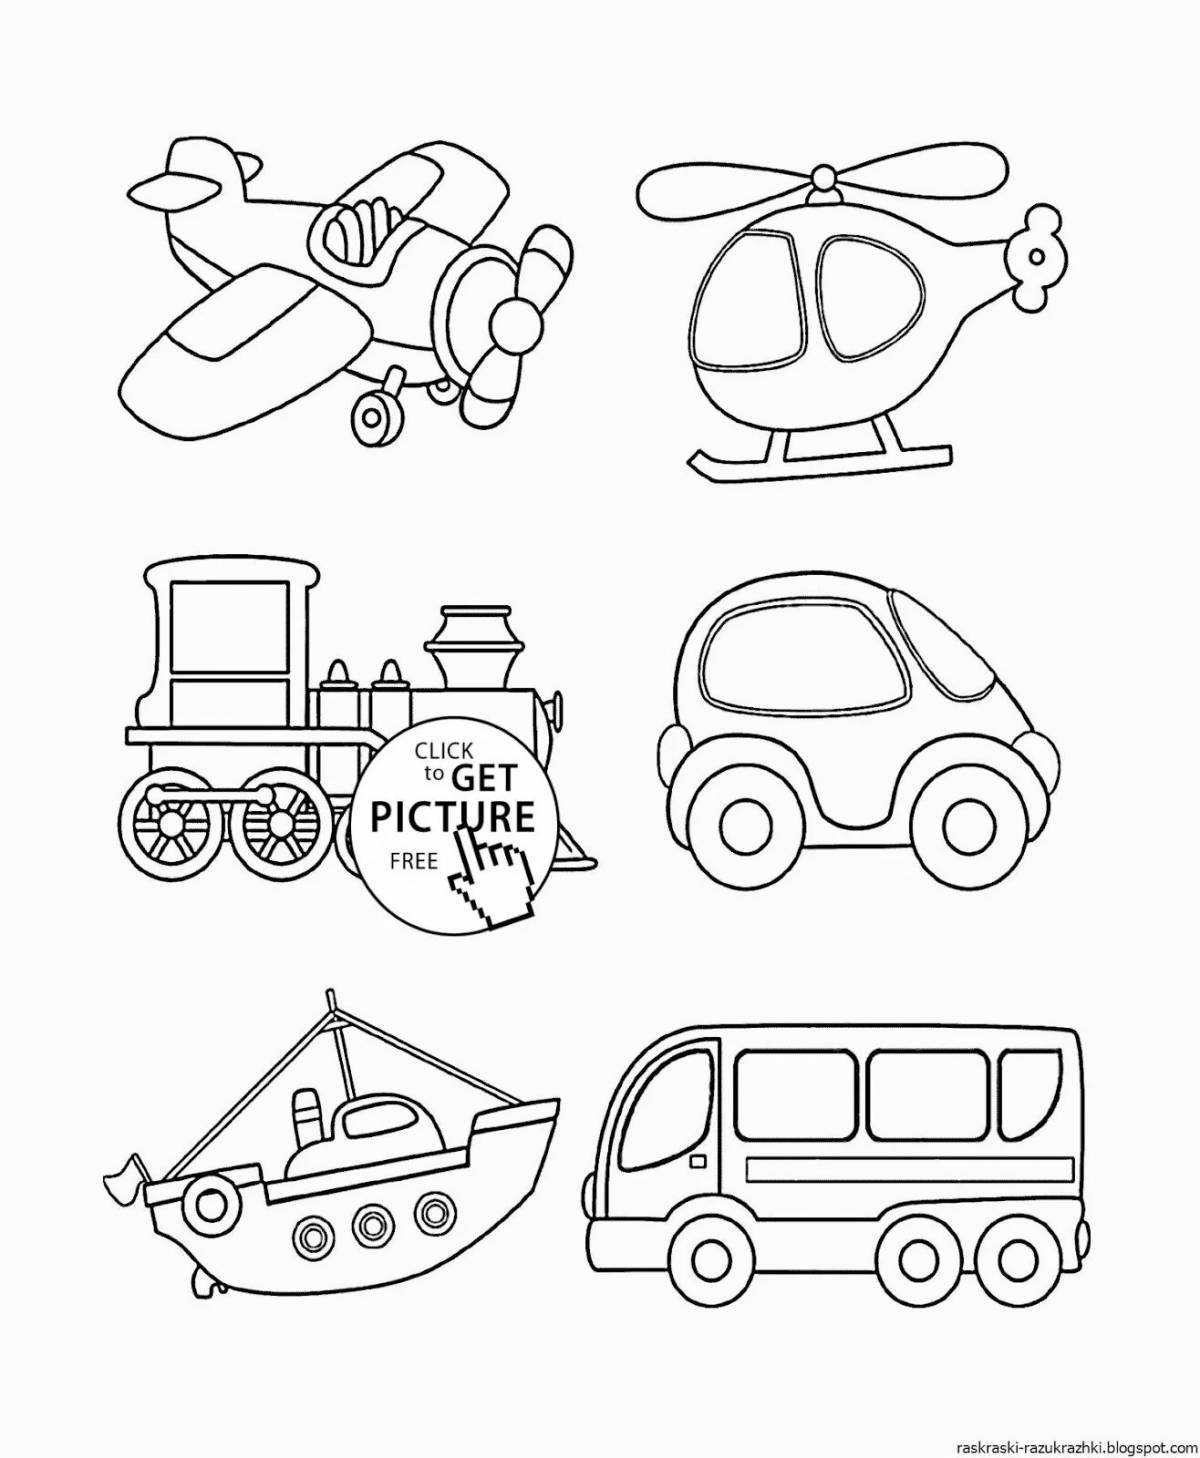 Adorable transport coloring book for little ones